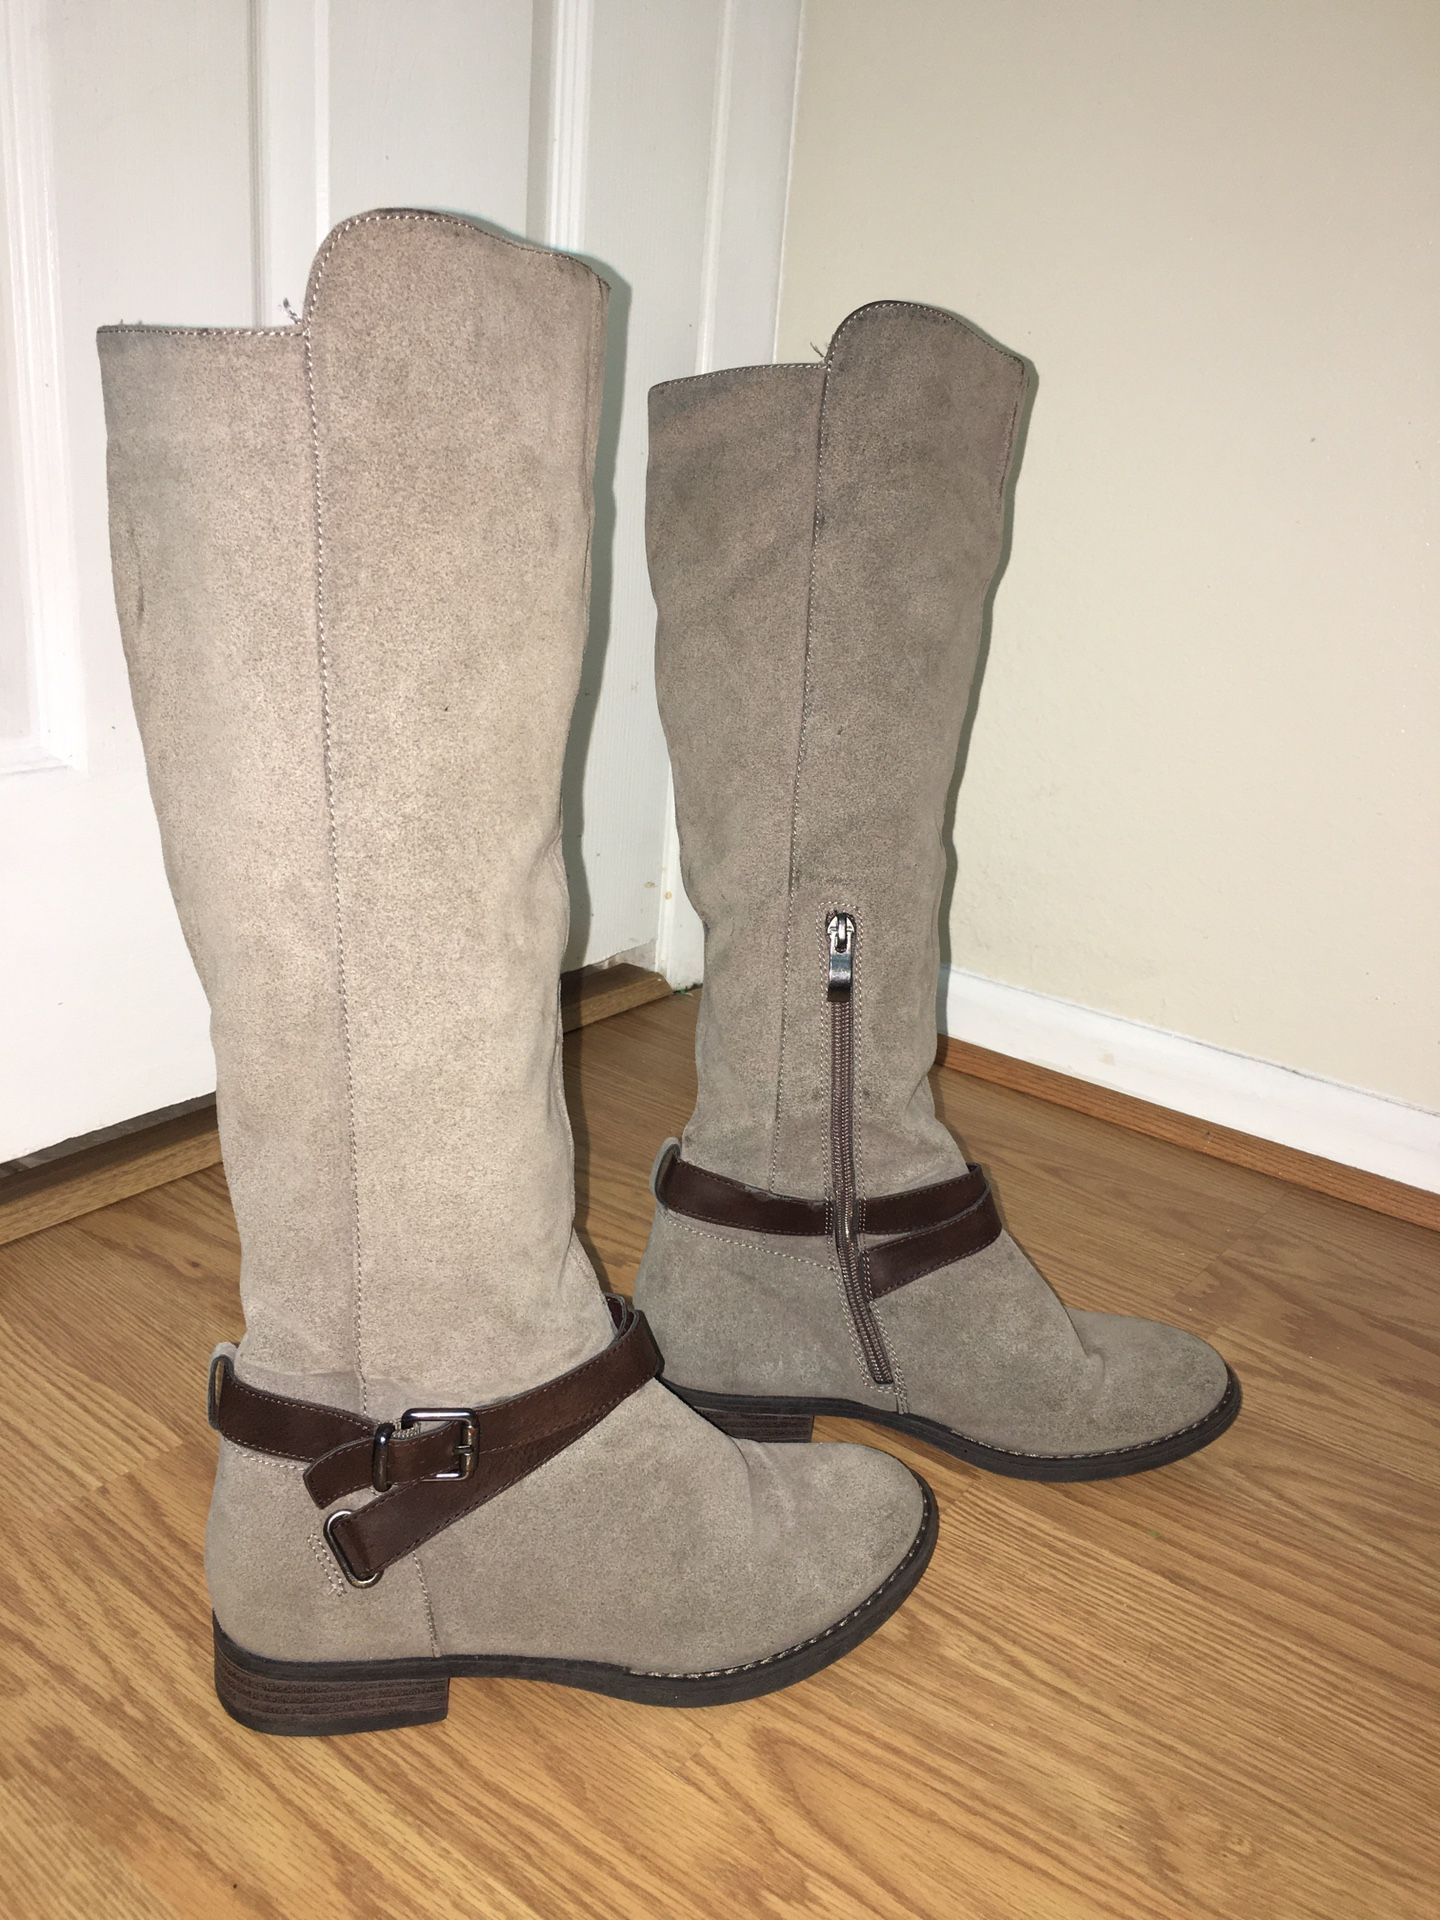 Women’s Boots size 7 